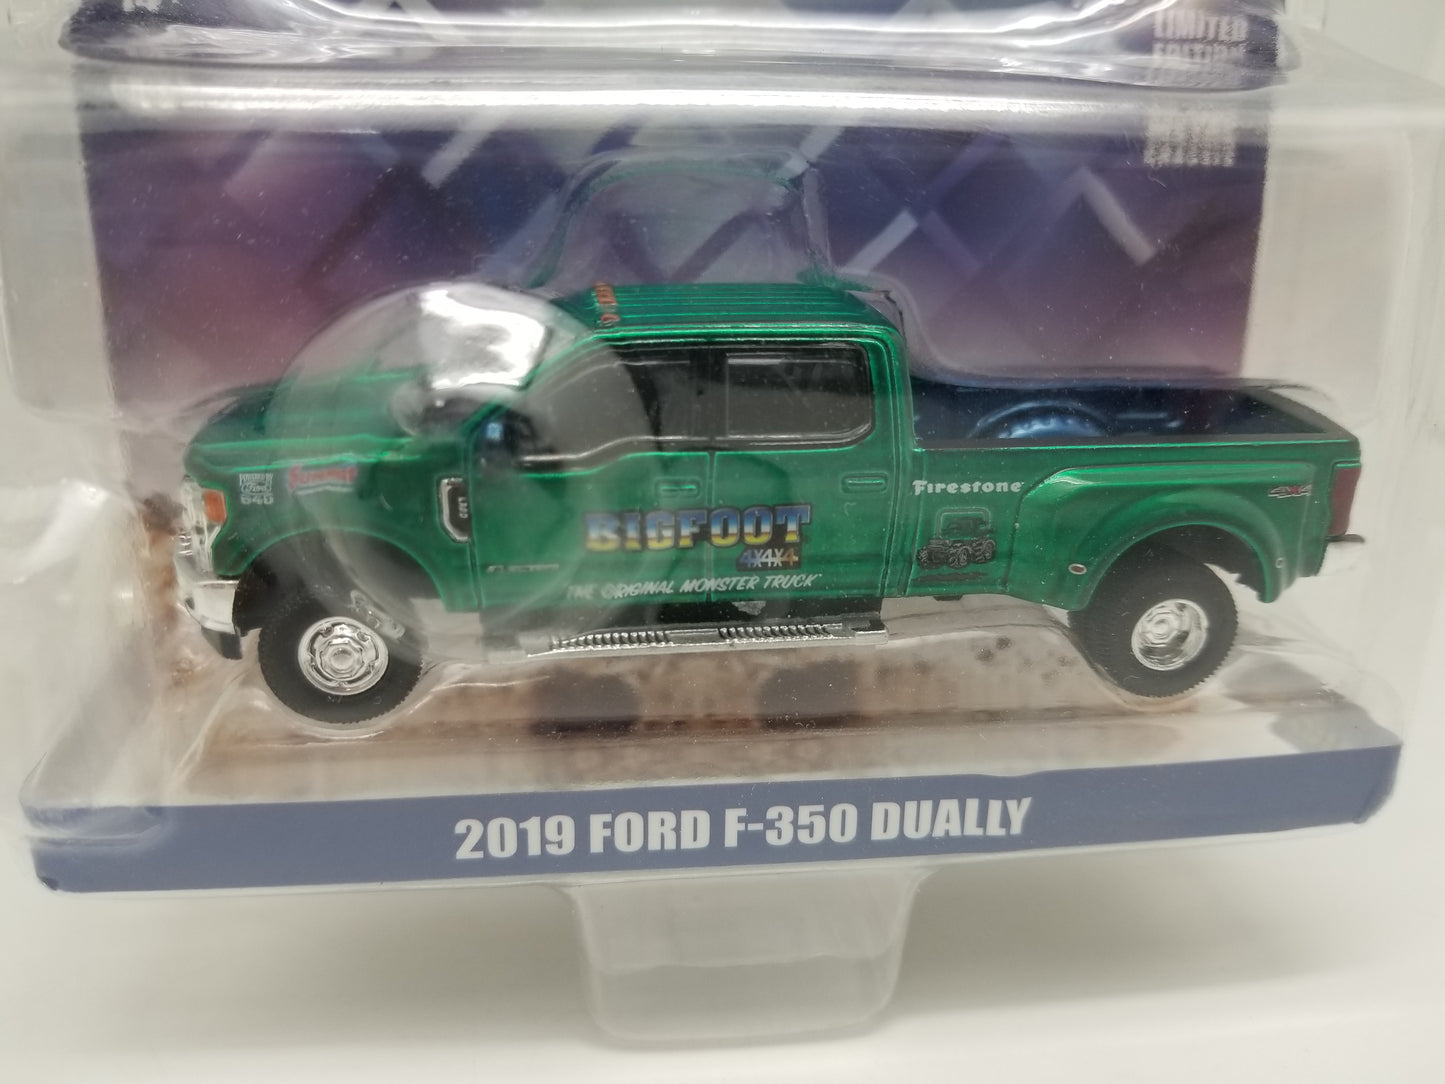 GL CHASE - 2019 BIGFOOT Ford F350 Dually Clean version